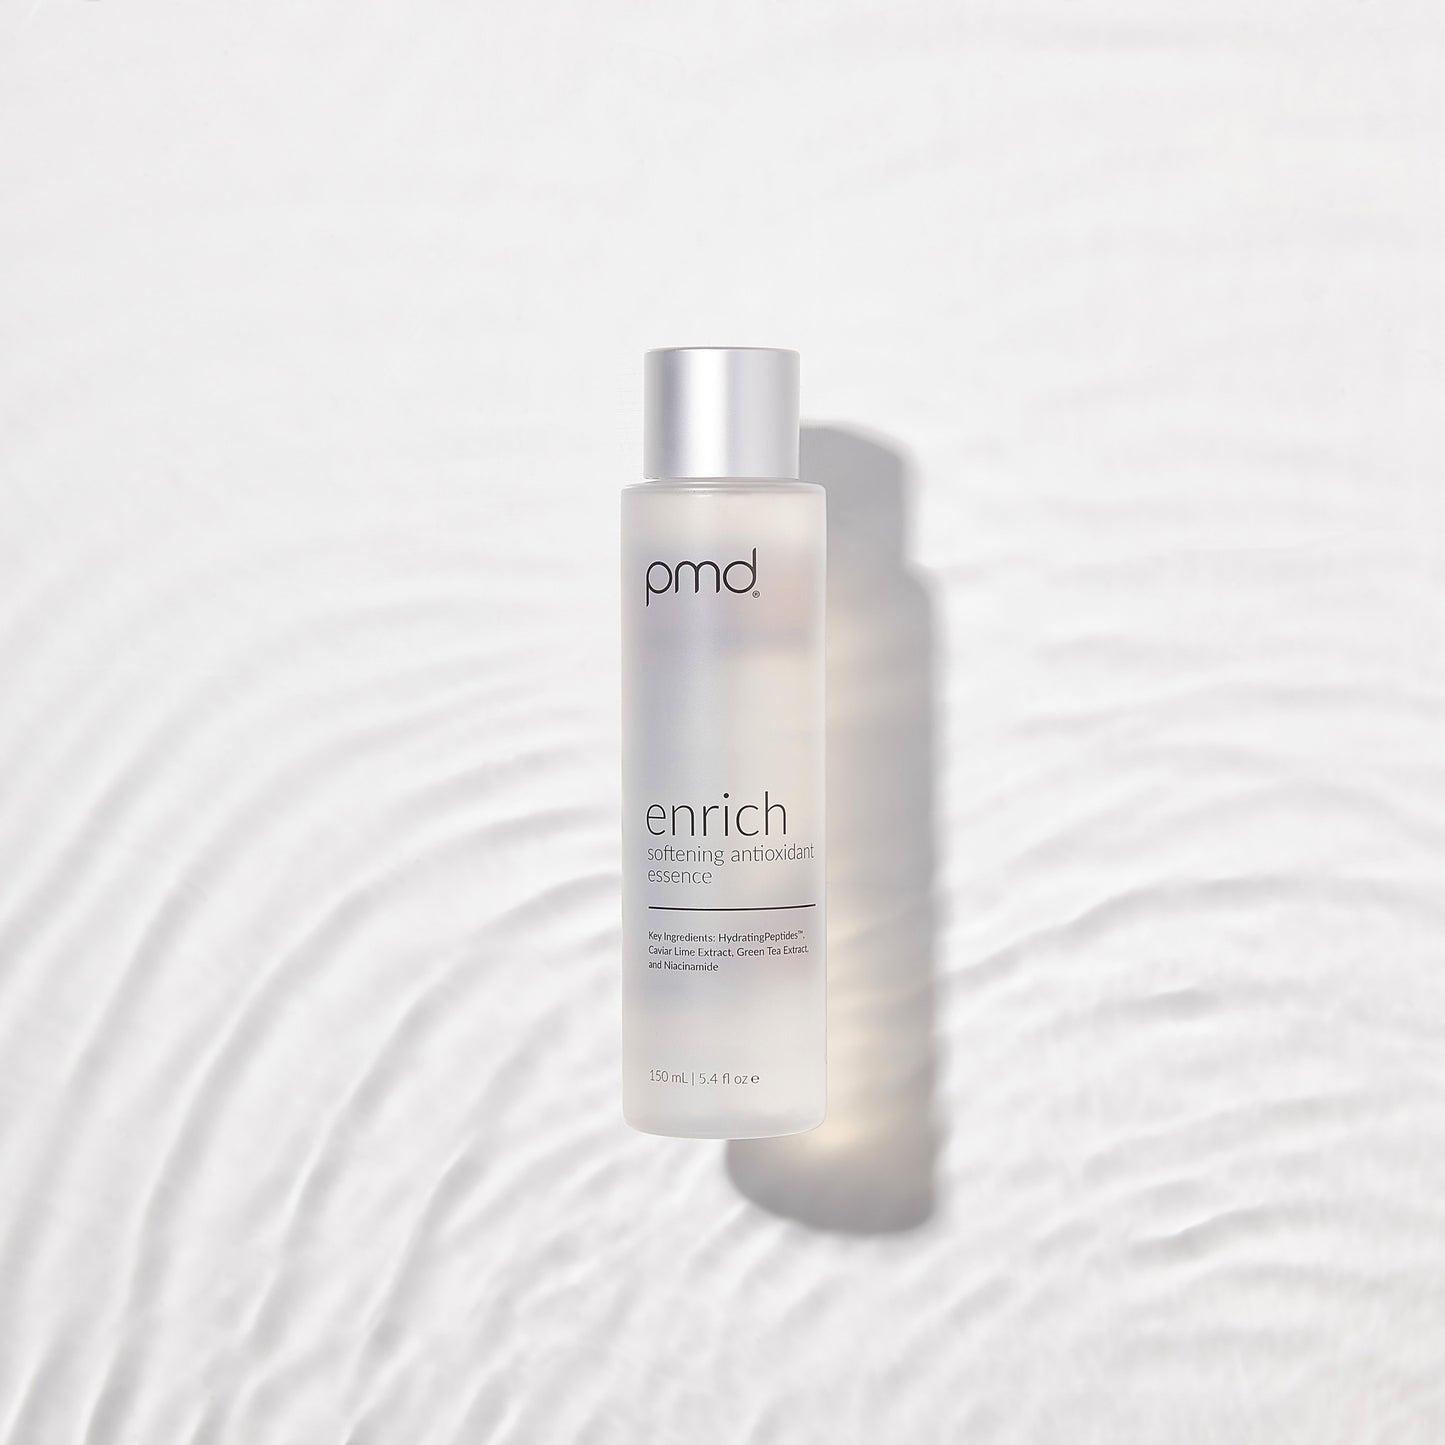 1070-enrich?enrich Softening Antioxidant Essence with water background